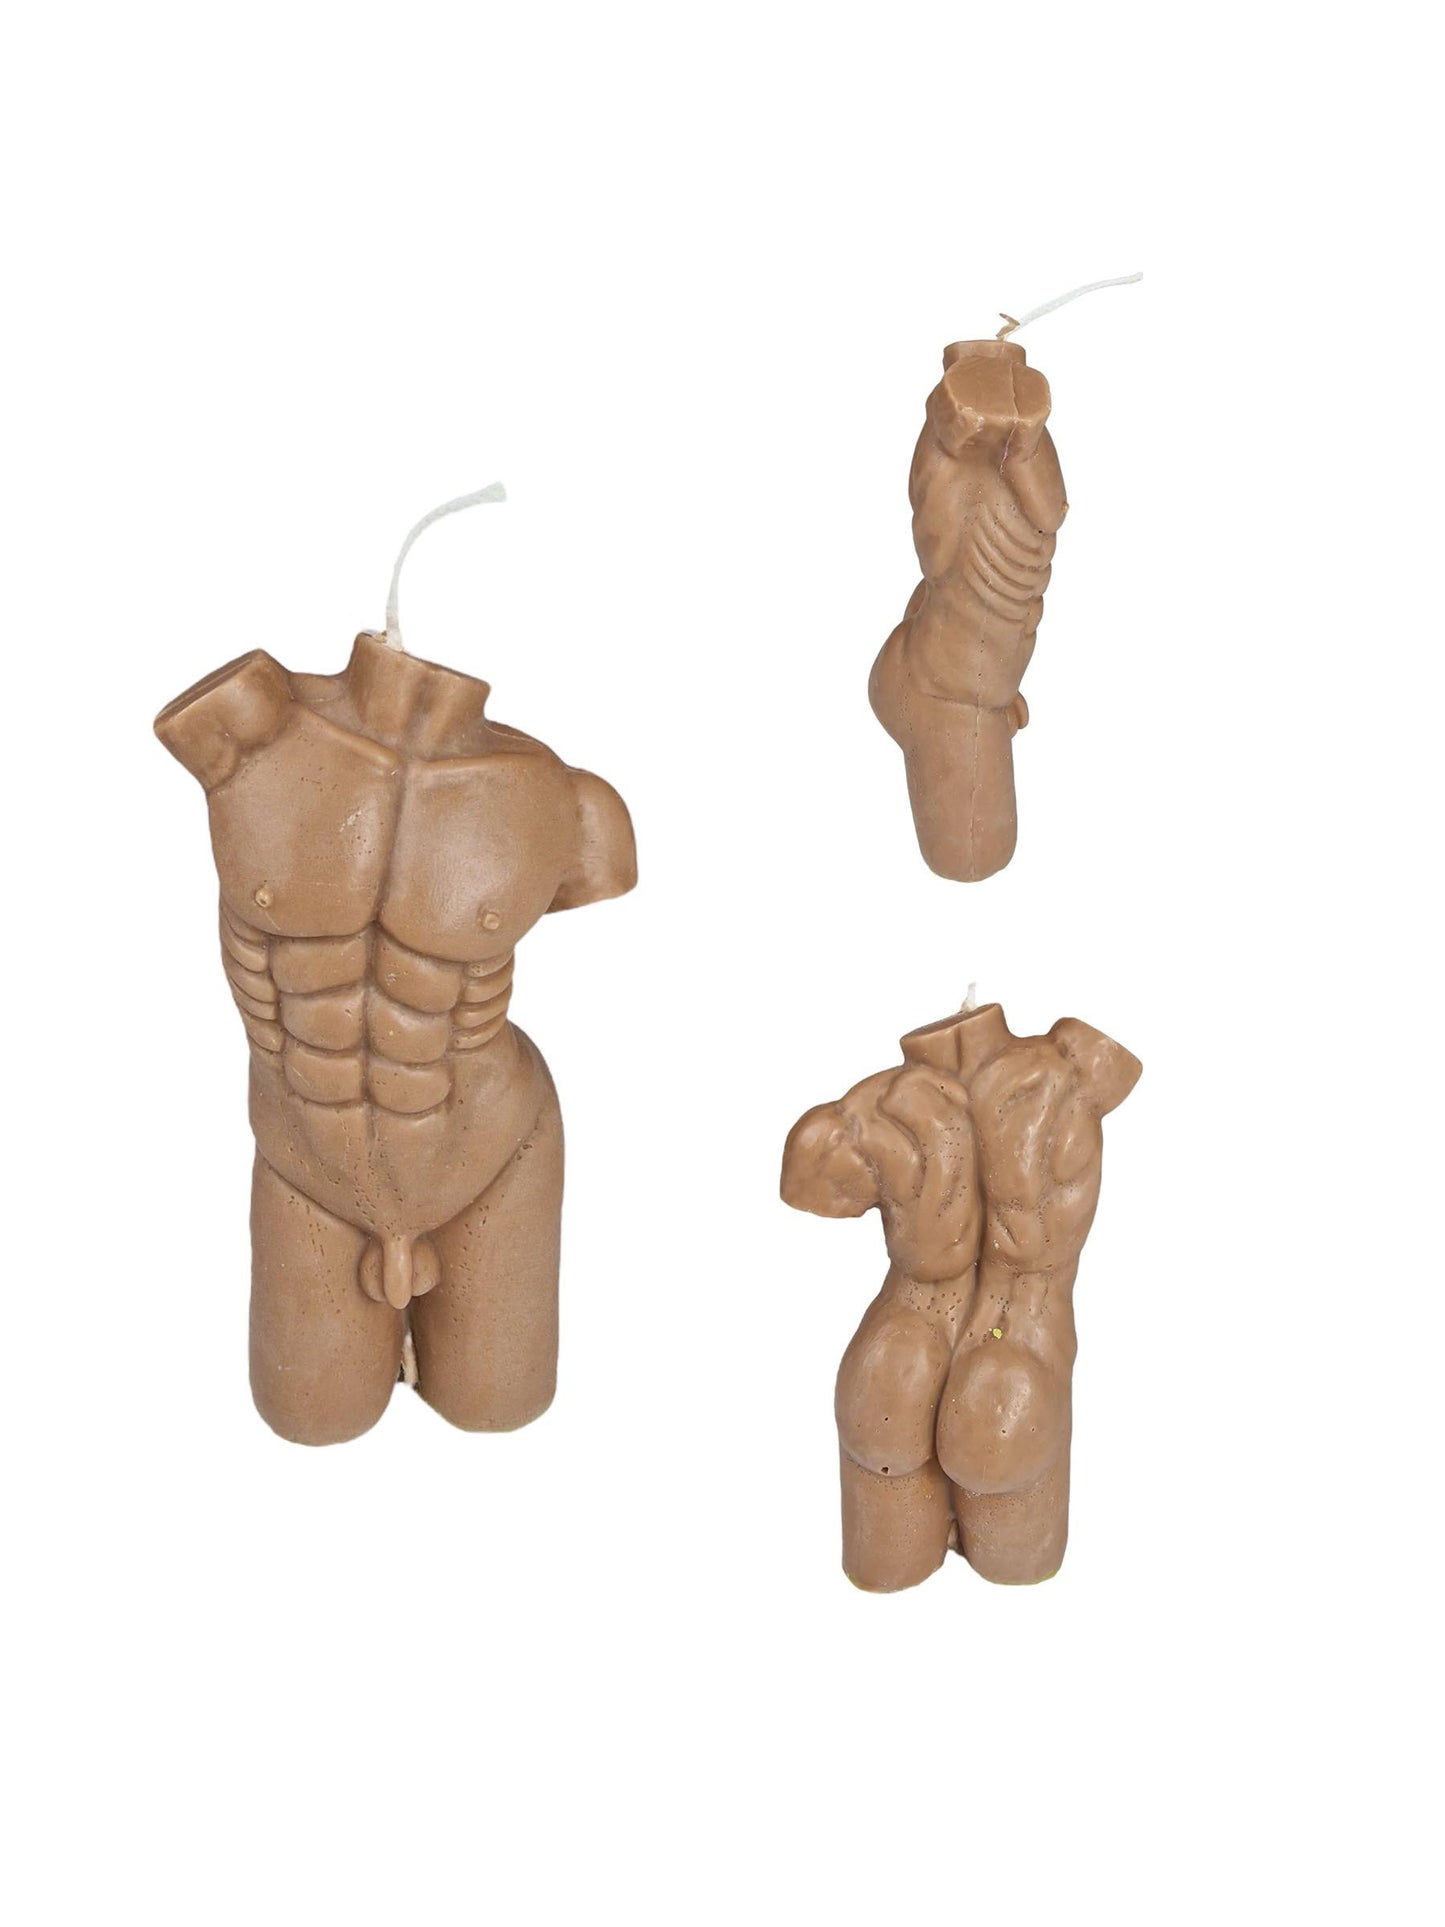 Fun and different light in the shape of a man's torso. Available in many colors